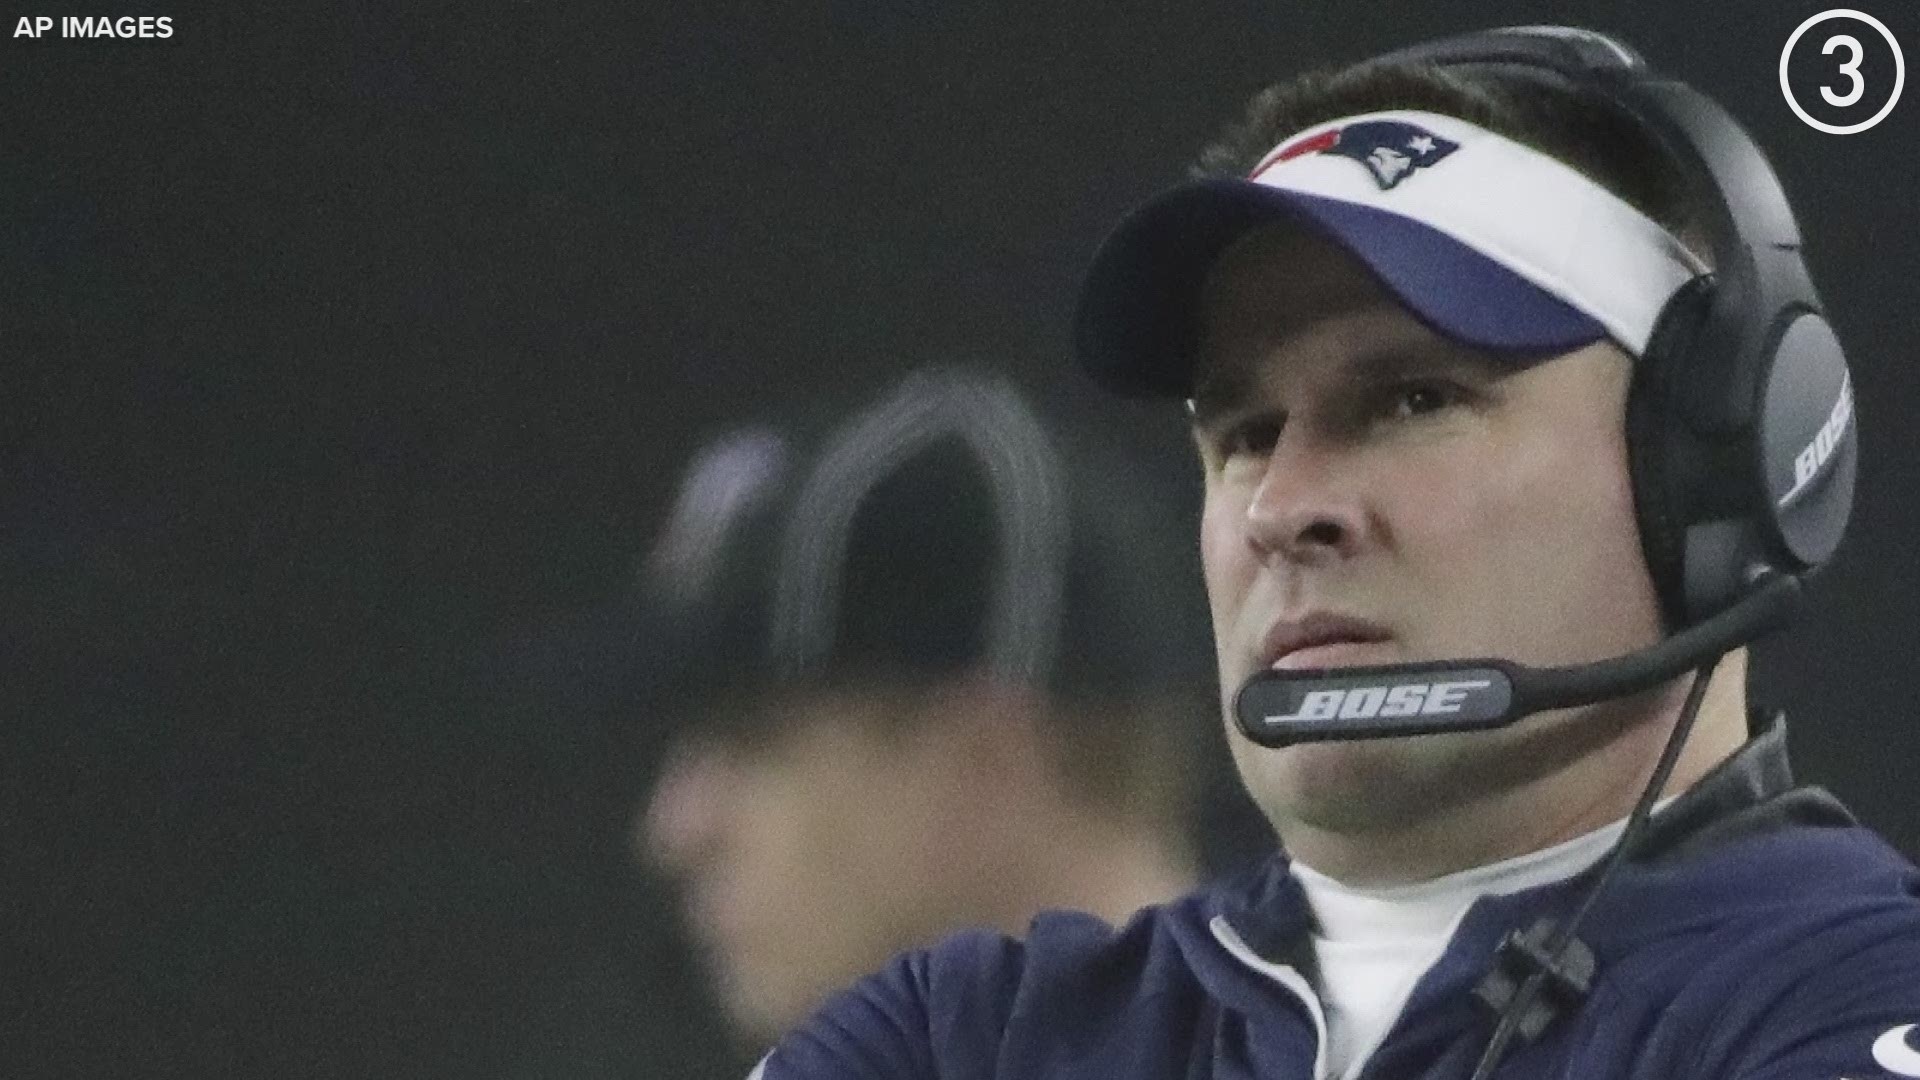 What's the latest with McDaniels? According to WEEI's Courtney Fallon, there is a "50/50 chance" that Josh McDaniels will remain with the Patriots.